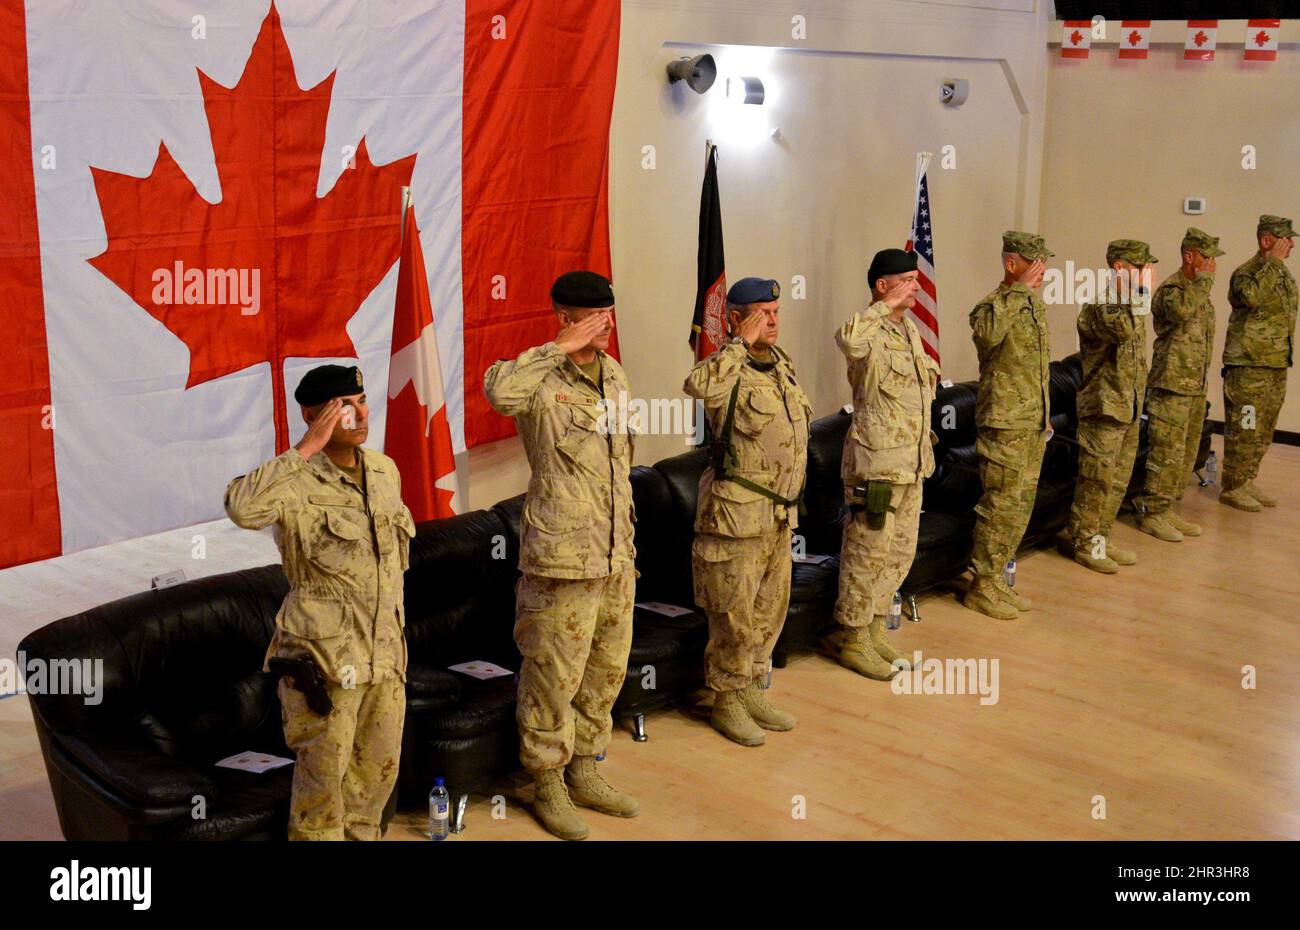 Canadian and American officers salute during the playing of the Canadian national anthem during a transfer of authority ceremony on Thursday, July 7, 2011. From the left: Chief Warrant Officer Gerald Blais, Brig.-Gen. Dean Milner, Chief Warrant Officer Jorma Â“HammyÂ” Hamalainen, Lt.-Gen. Marc Lessard, commander of Canadian Expeditionary Force, Maj.-Gen. James Terry, head of NATO Regional Command South, Command Sgt.-Maj. Christopher Greca, U.S. 10th Mountain Division, Col. Todd Wood, commander of the 1st Stryker Combat Team, 25th U.S. Infantry Division and Command Sgt.-Maj. Bernie Knight. The  Stock Photo